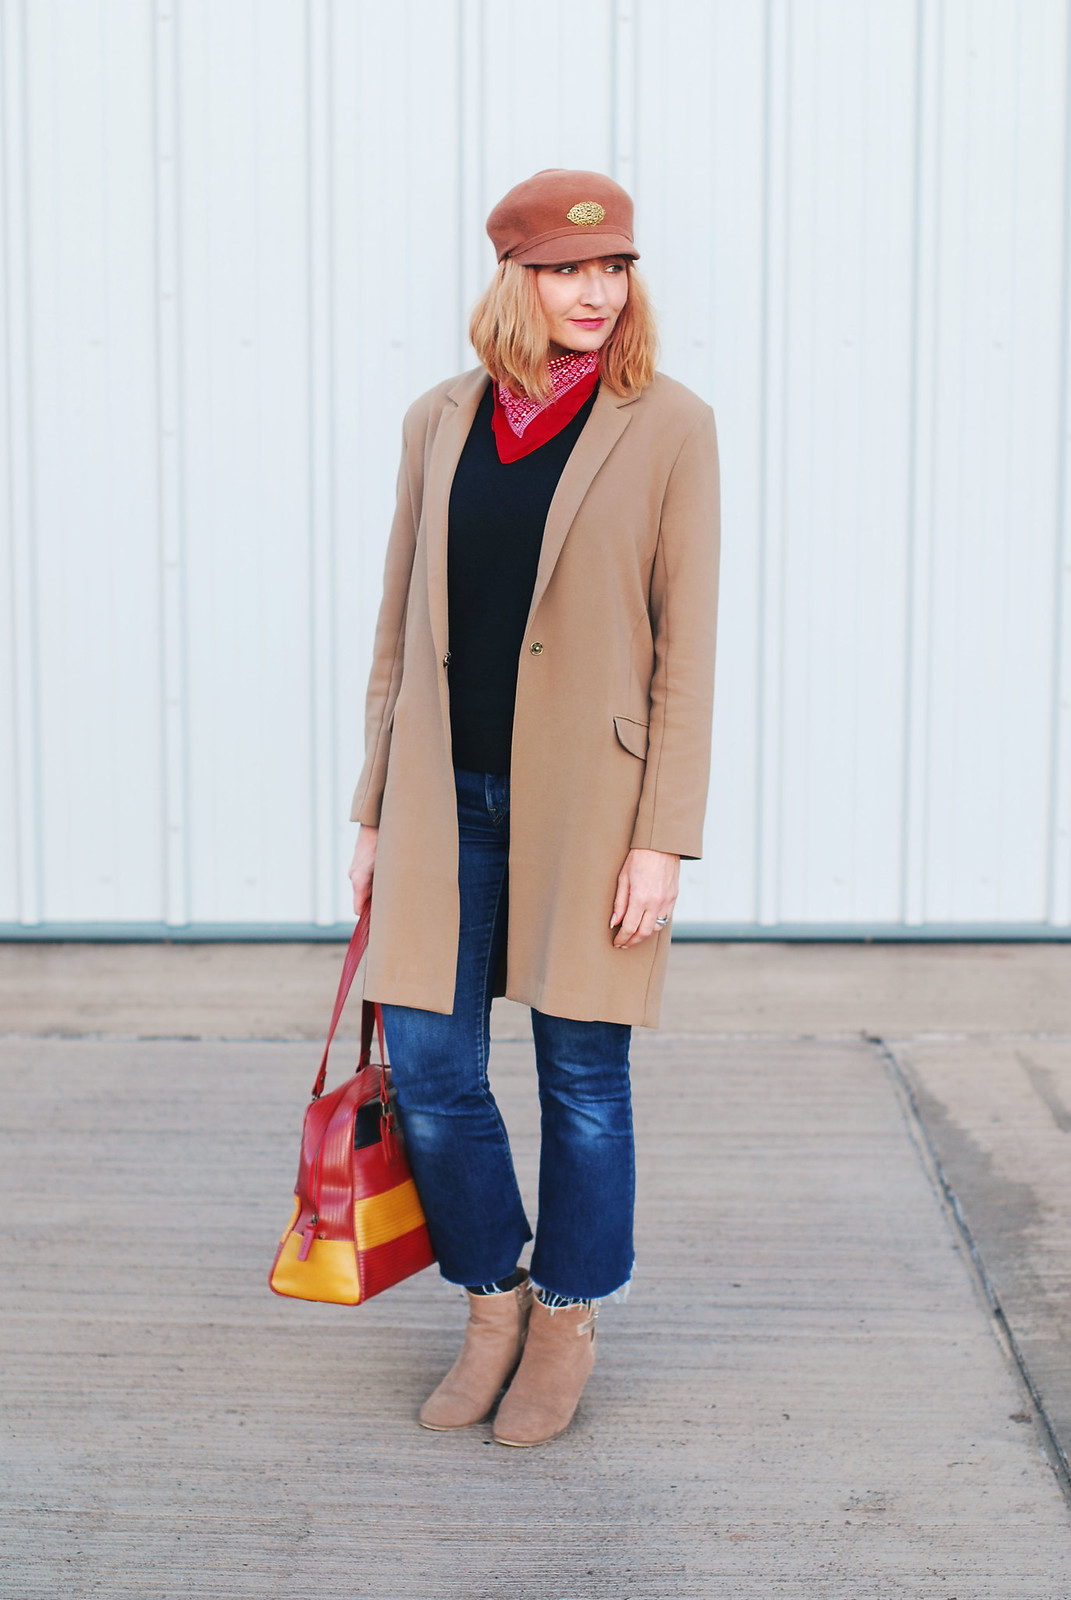 How to style a longline camel blazer for autumn/fall: Cropped flared jeans, suede ankle boots, vintage baker boy hat and neck scarf | Not Dressed As Lamb, over 40 style